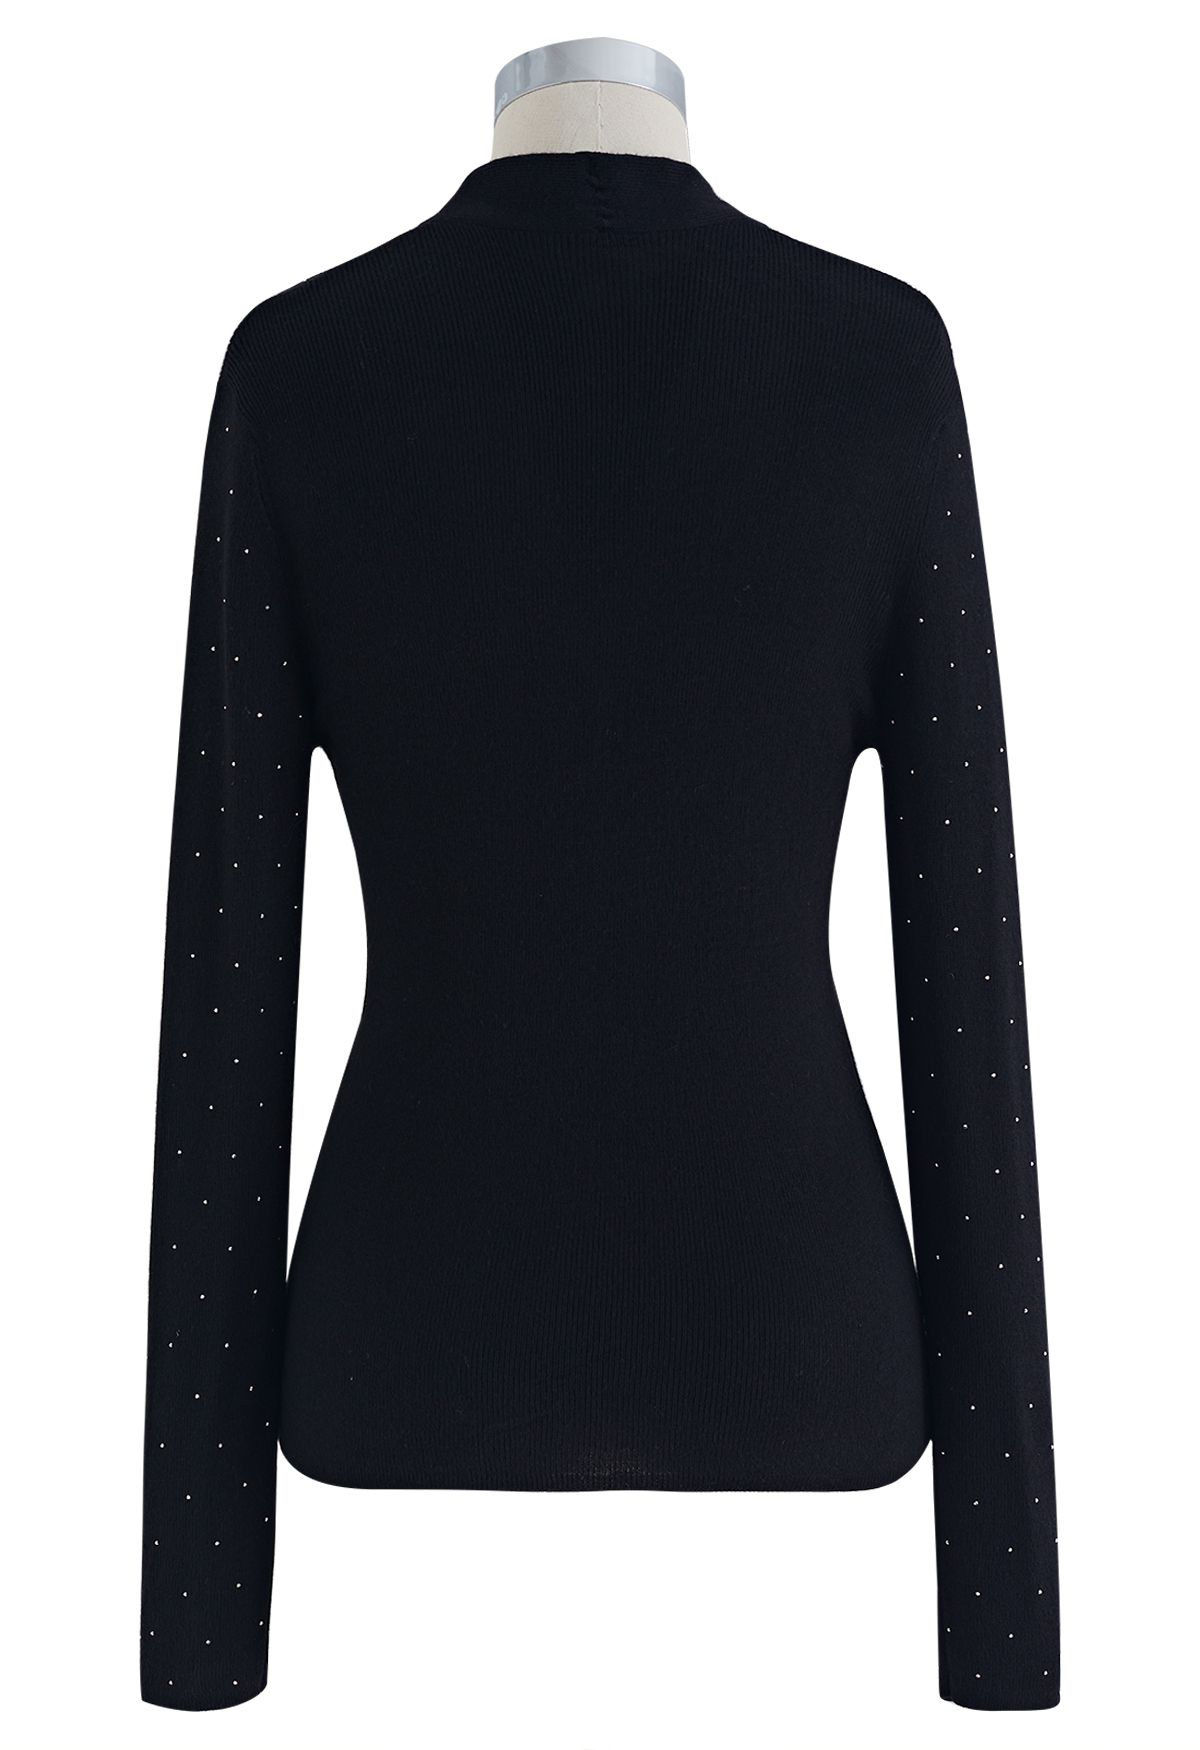 Scattered Crystal Ribbed Knit Fitted Top in Black